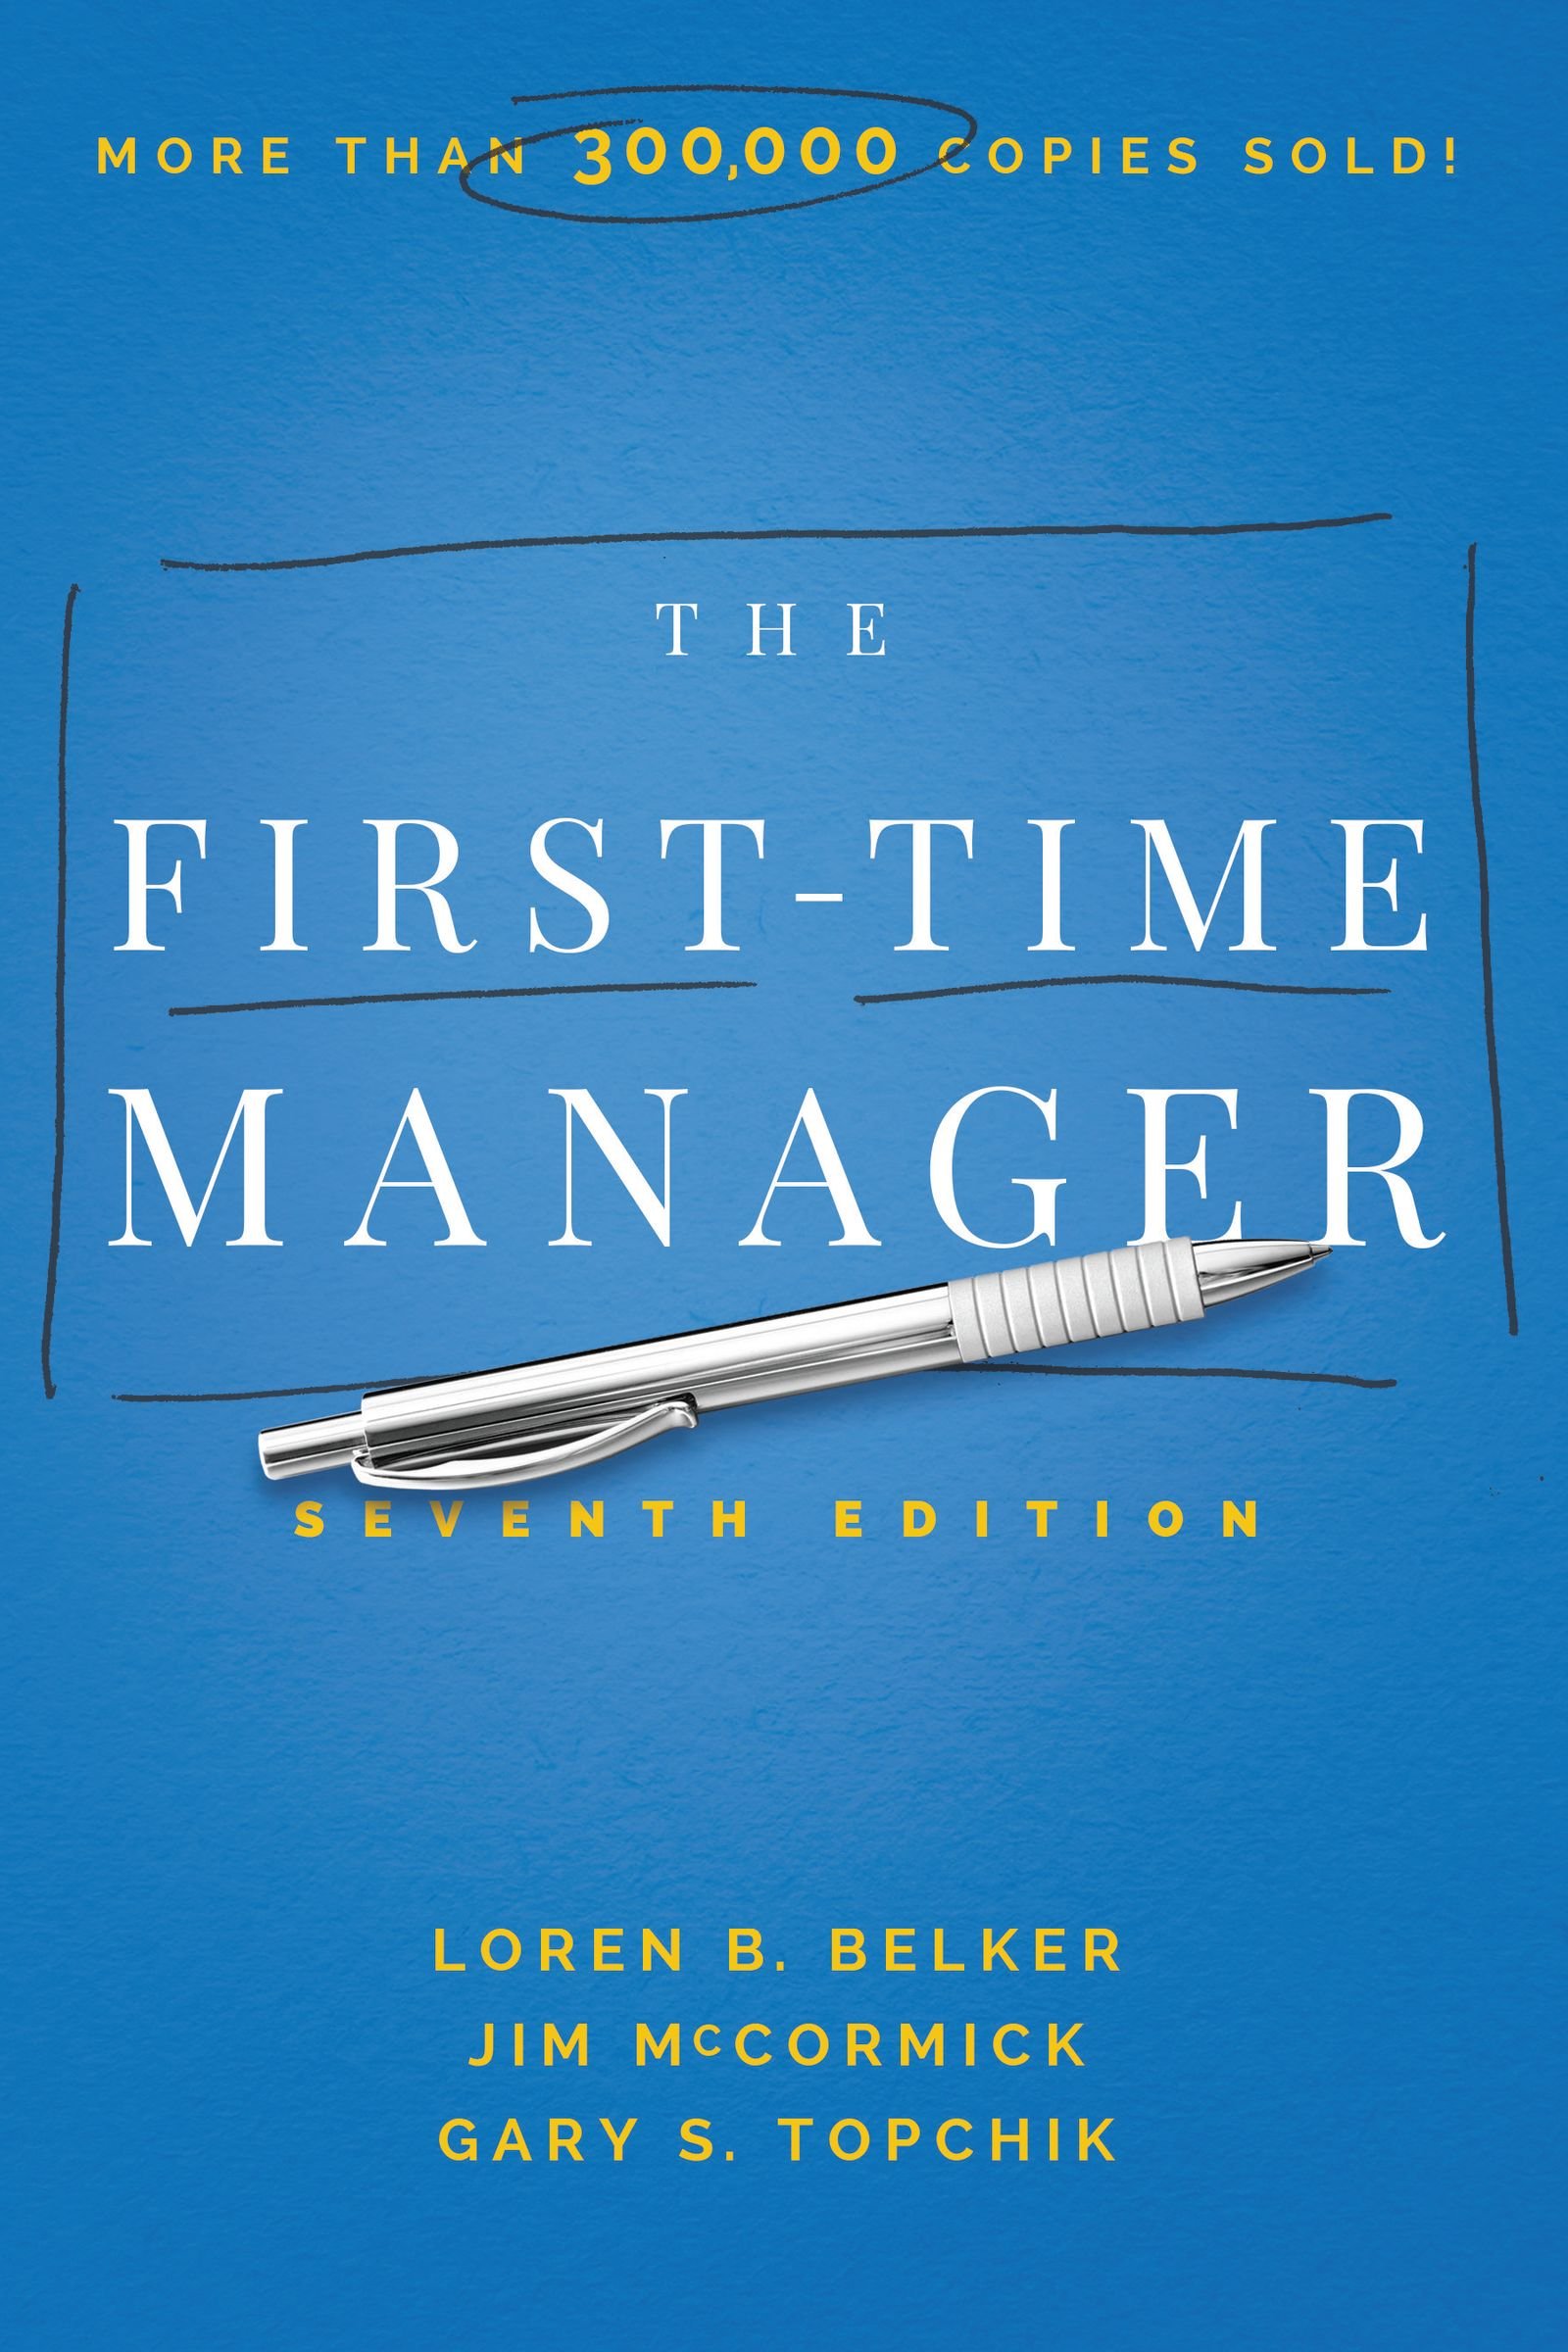 Stock image of The First-Time Manager book